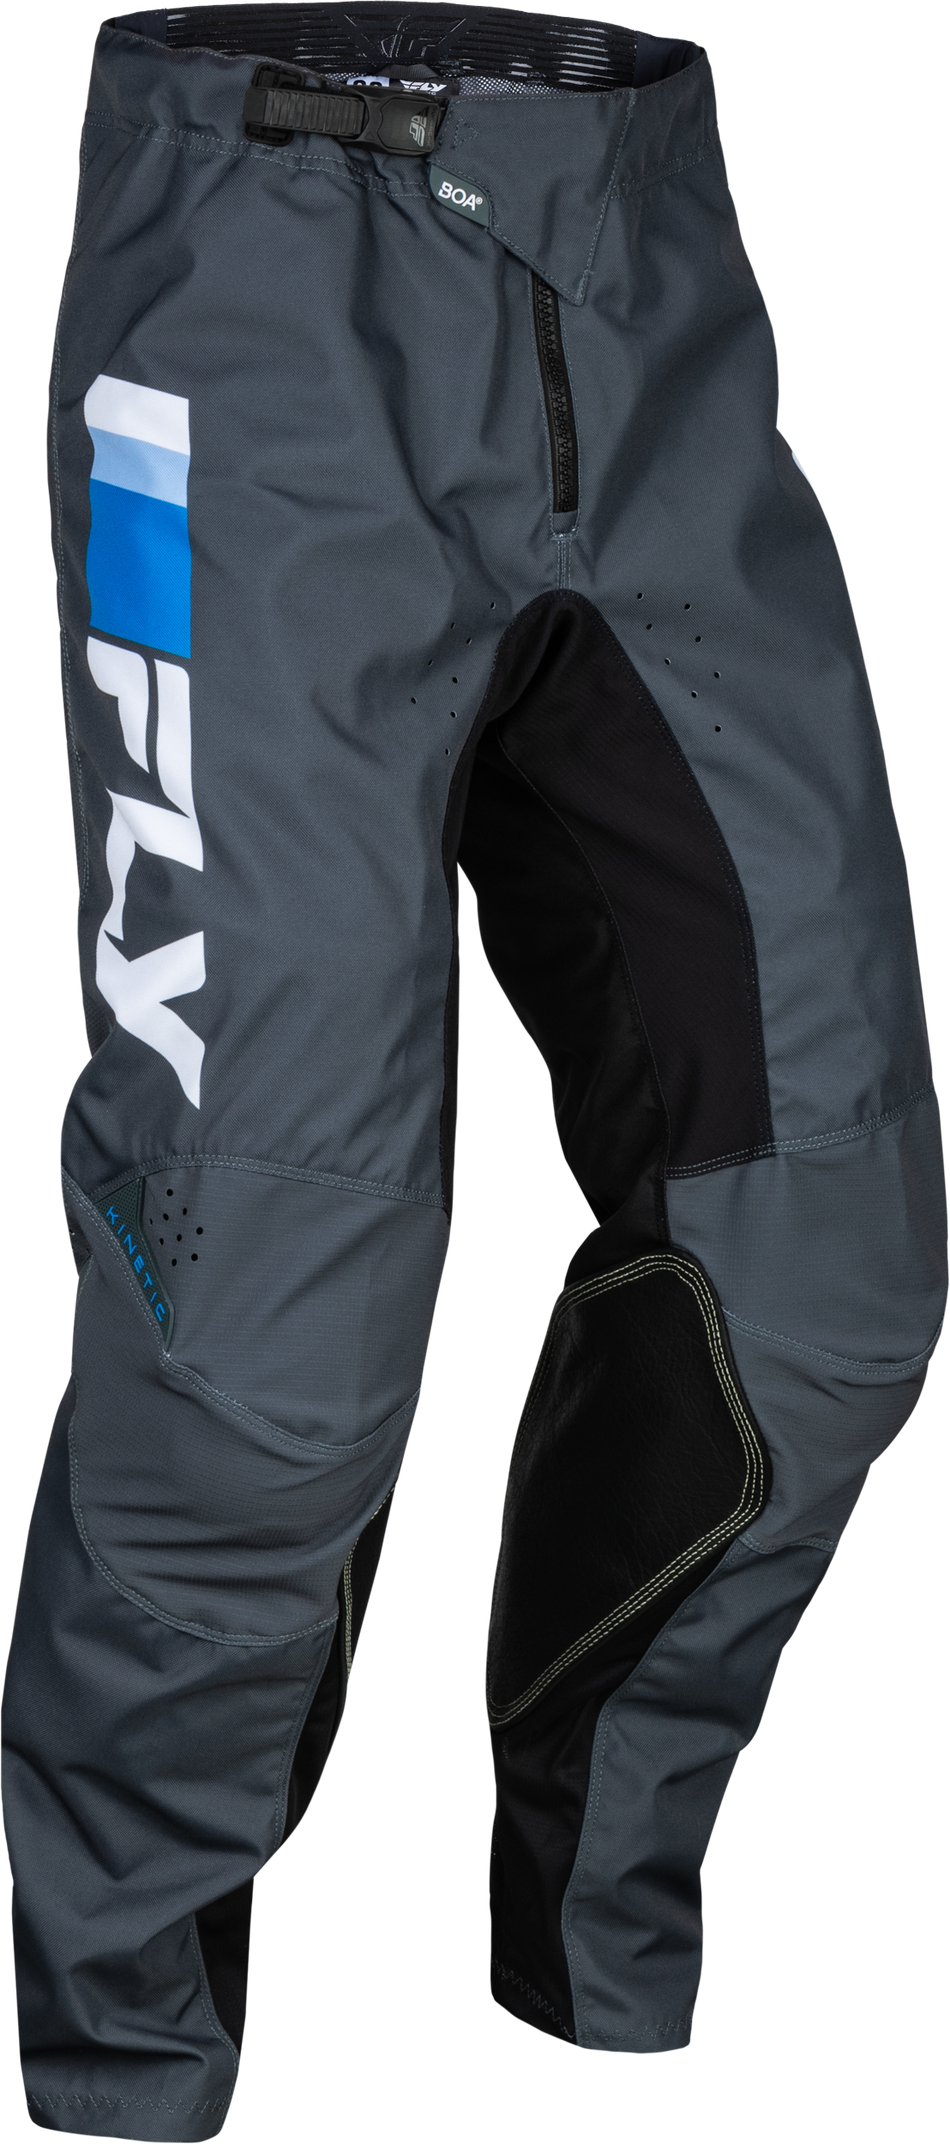 FLY RACING Youth Kinetic Prix Pants Bright Blue/Charcoal/Wht Sz 24 377-43024